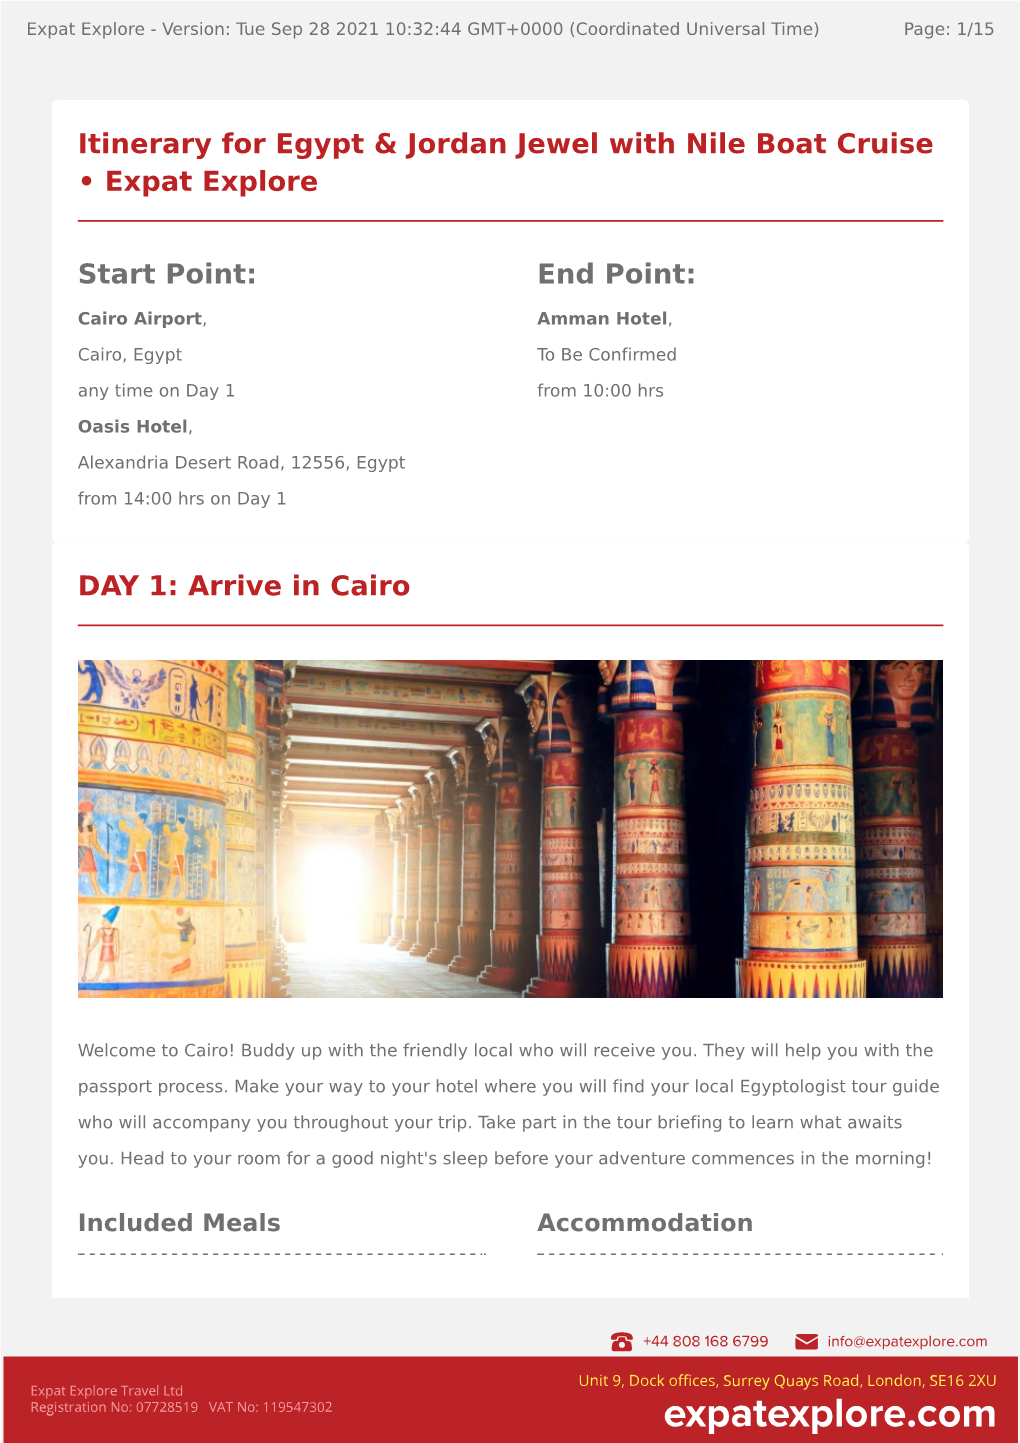 Arrive in Cairo Itinerary for Egypt & Jordan Jewel with Nile Boat Cruise